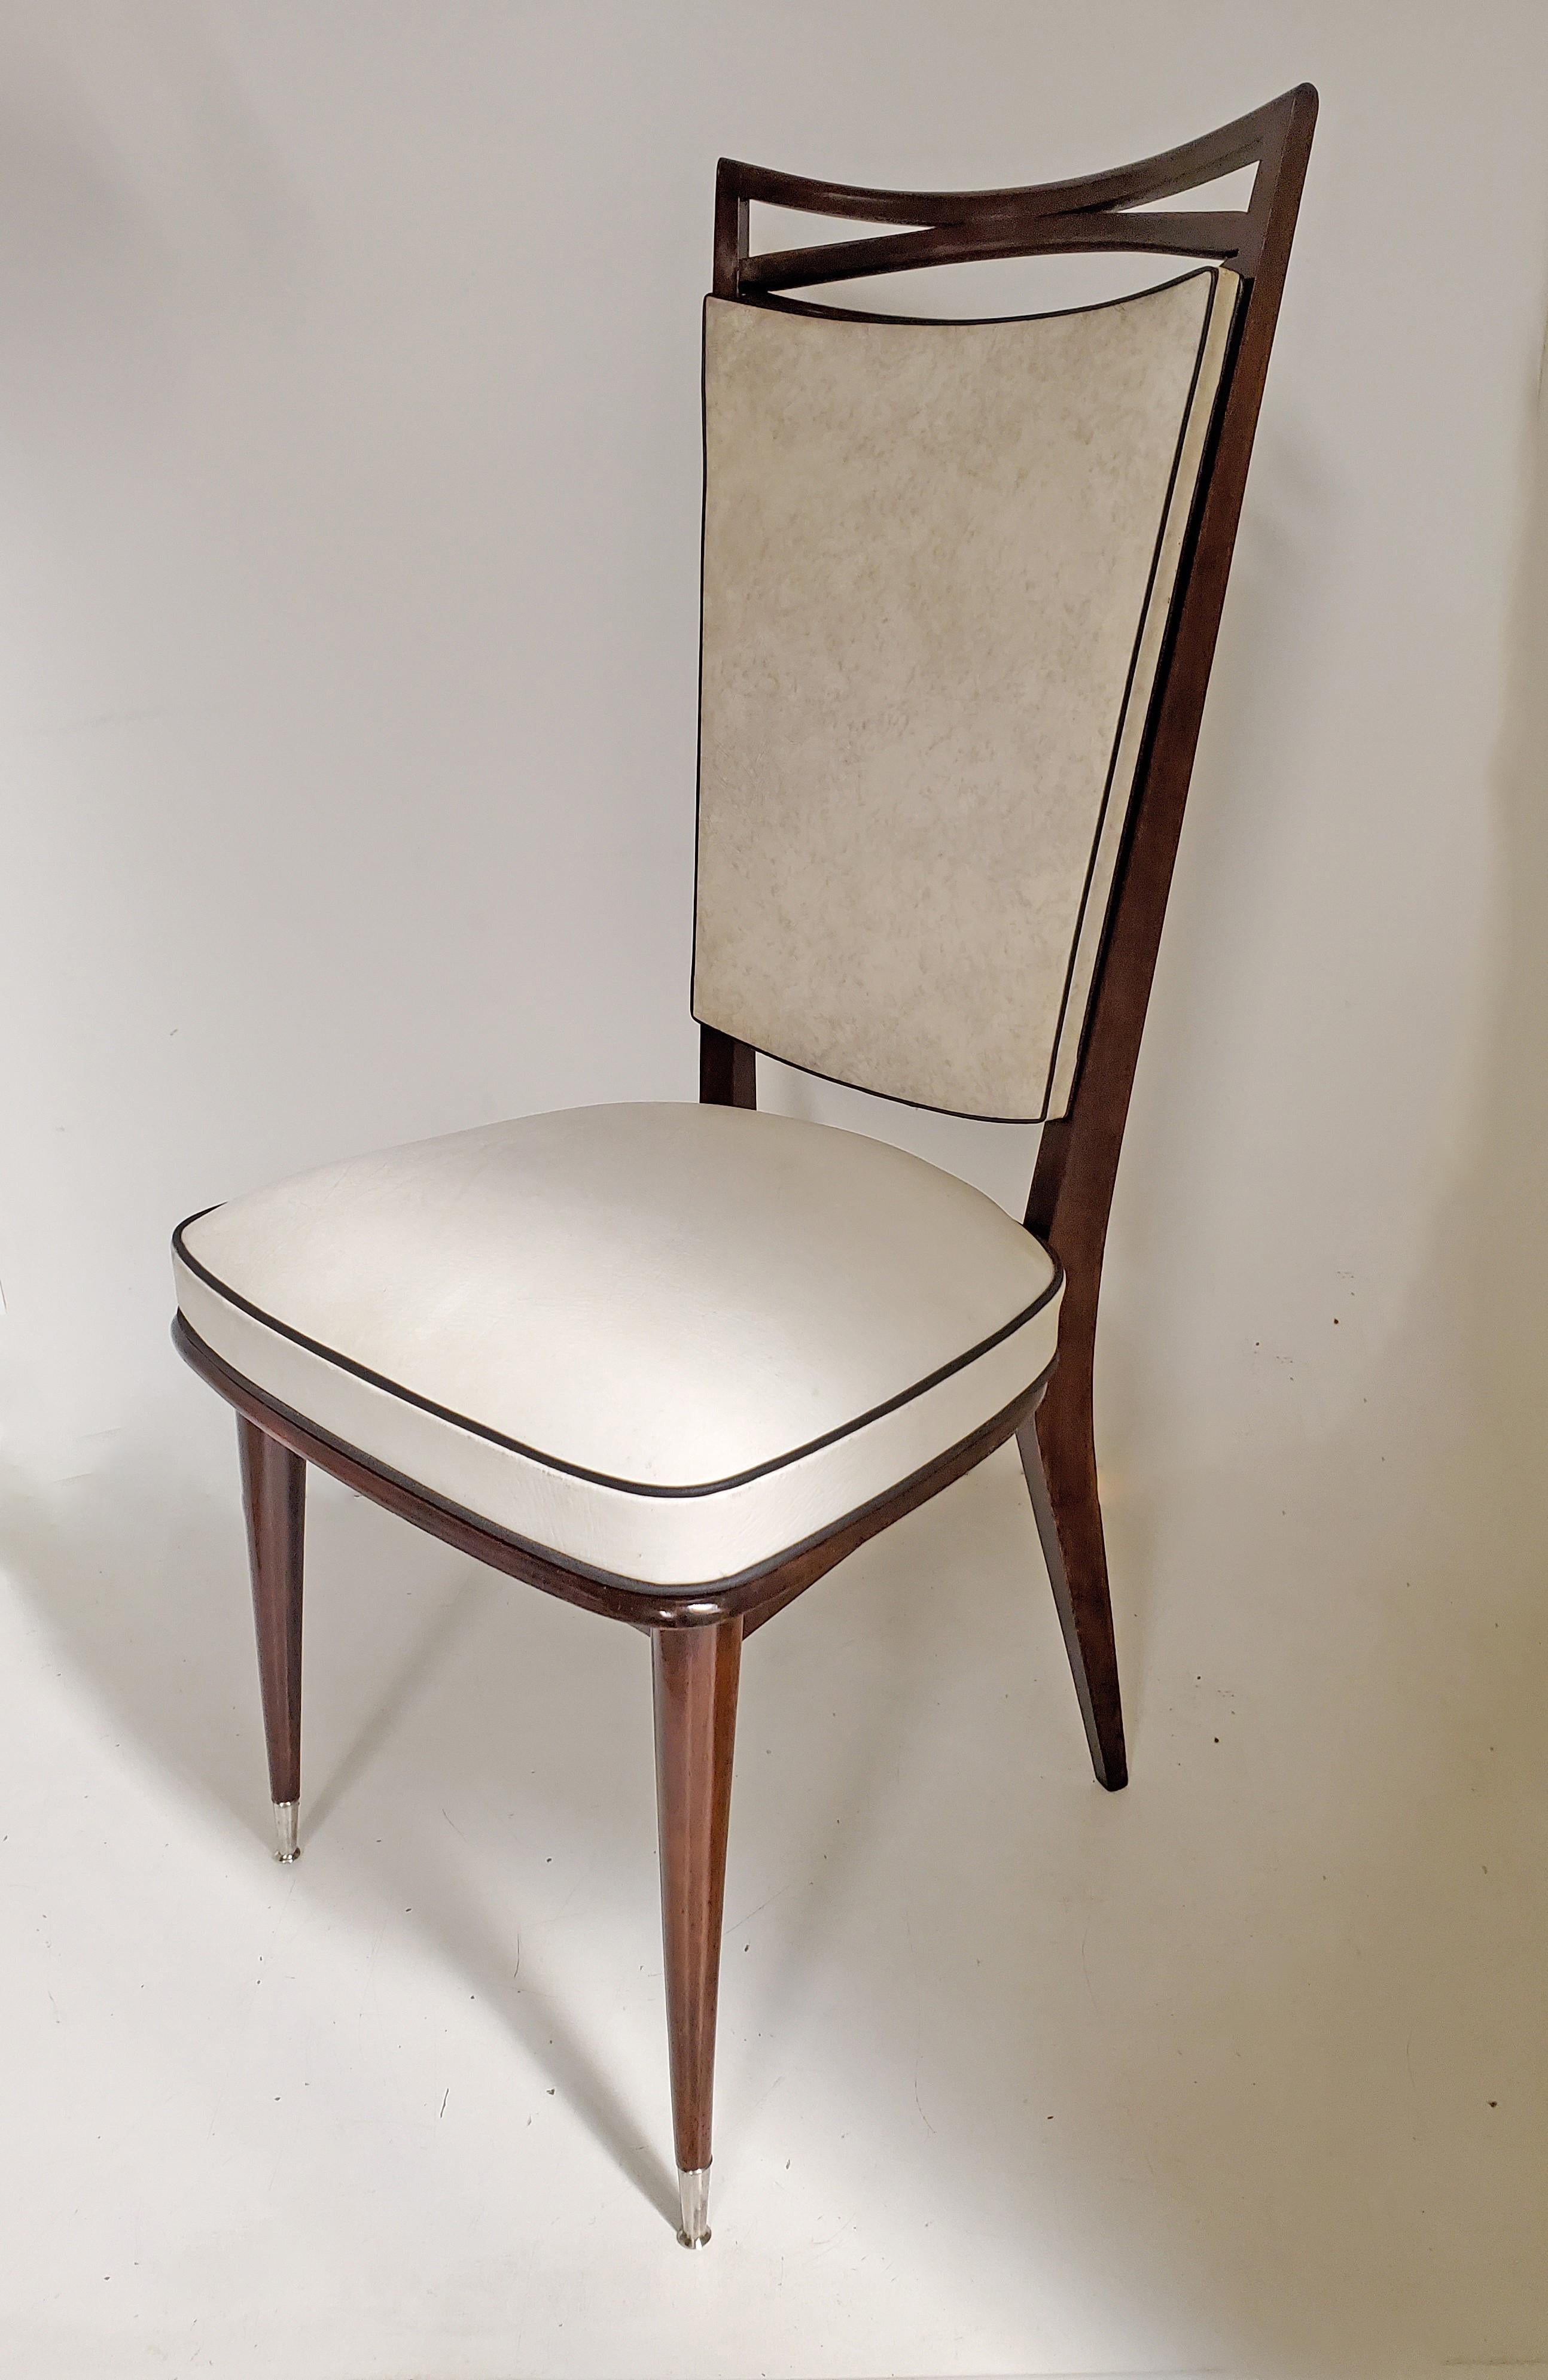 Four French Mid-Century Modern Dining / Side Chairs -Deep Mahogany Finish In Good Condition For Sale In New York City, NY